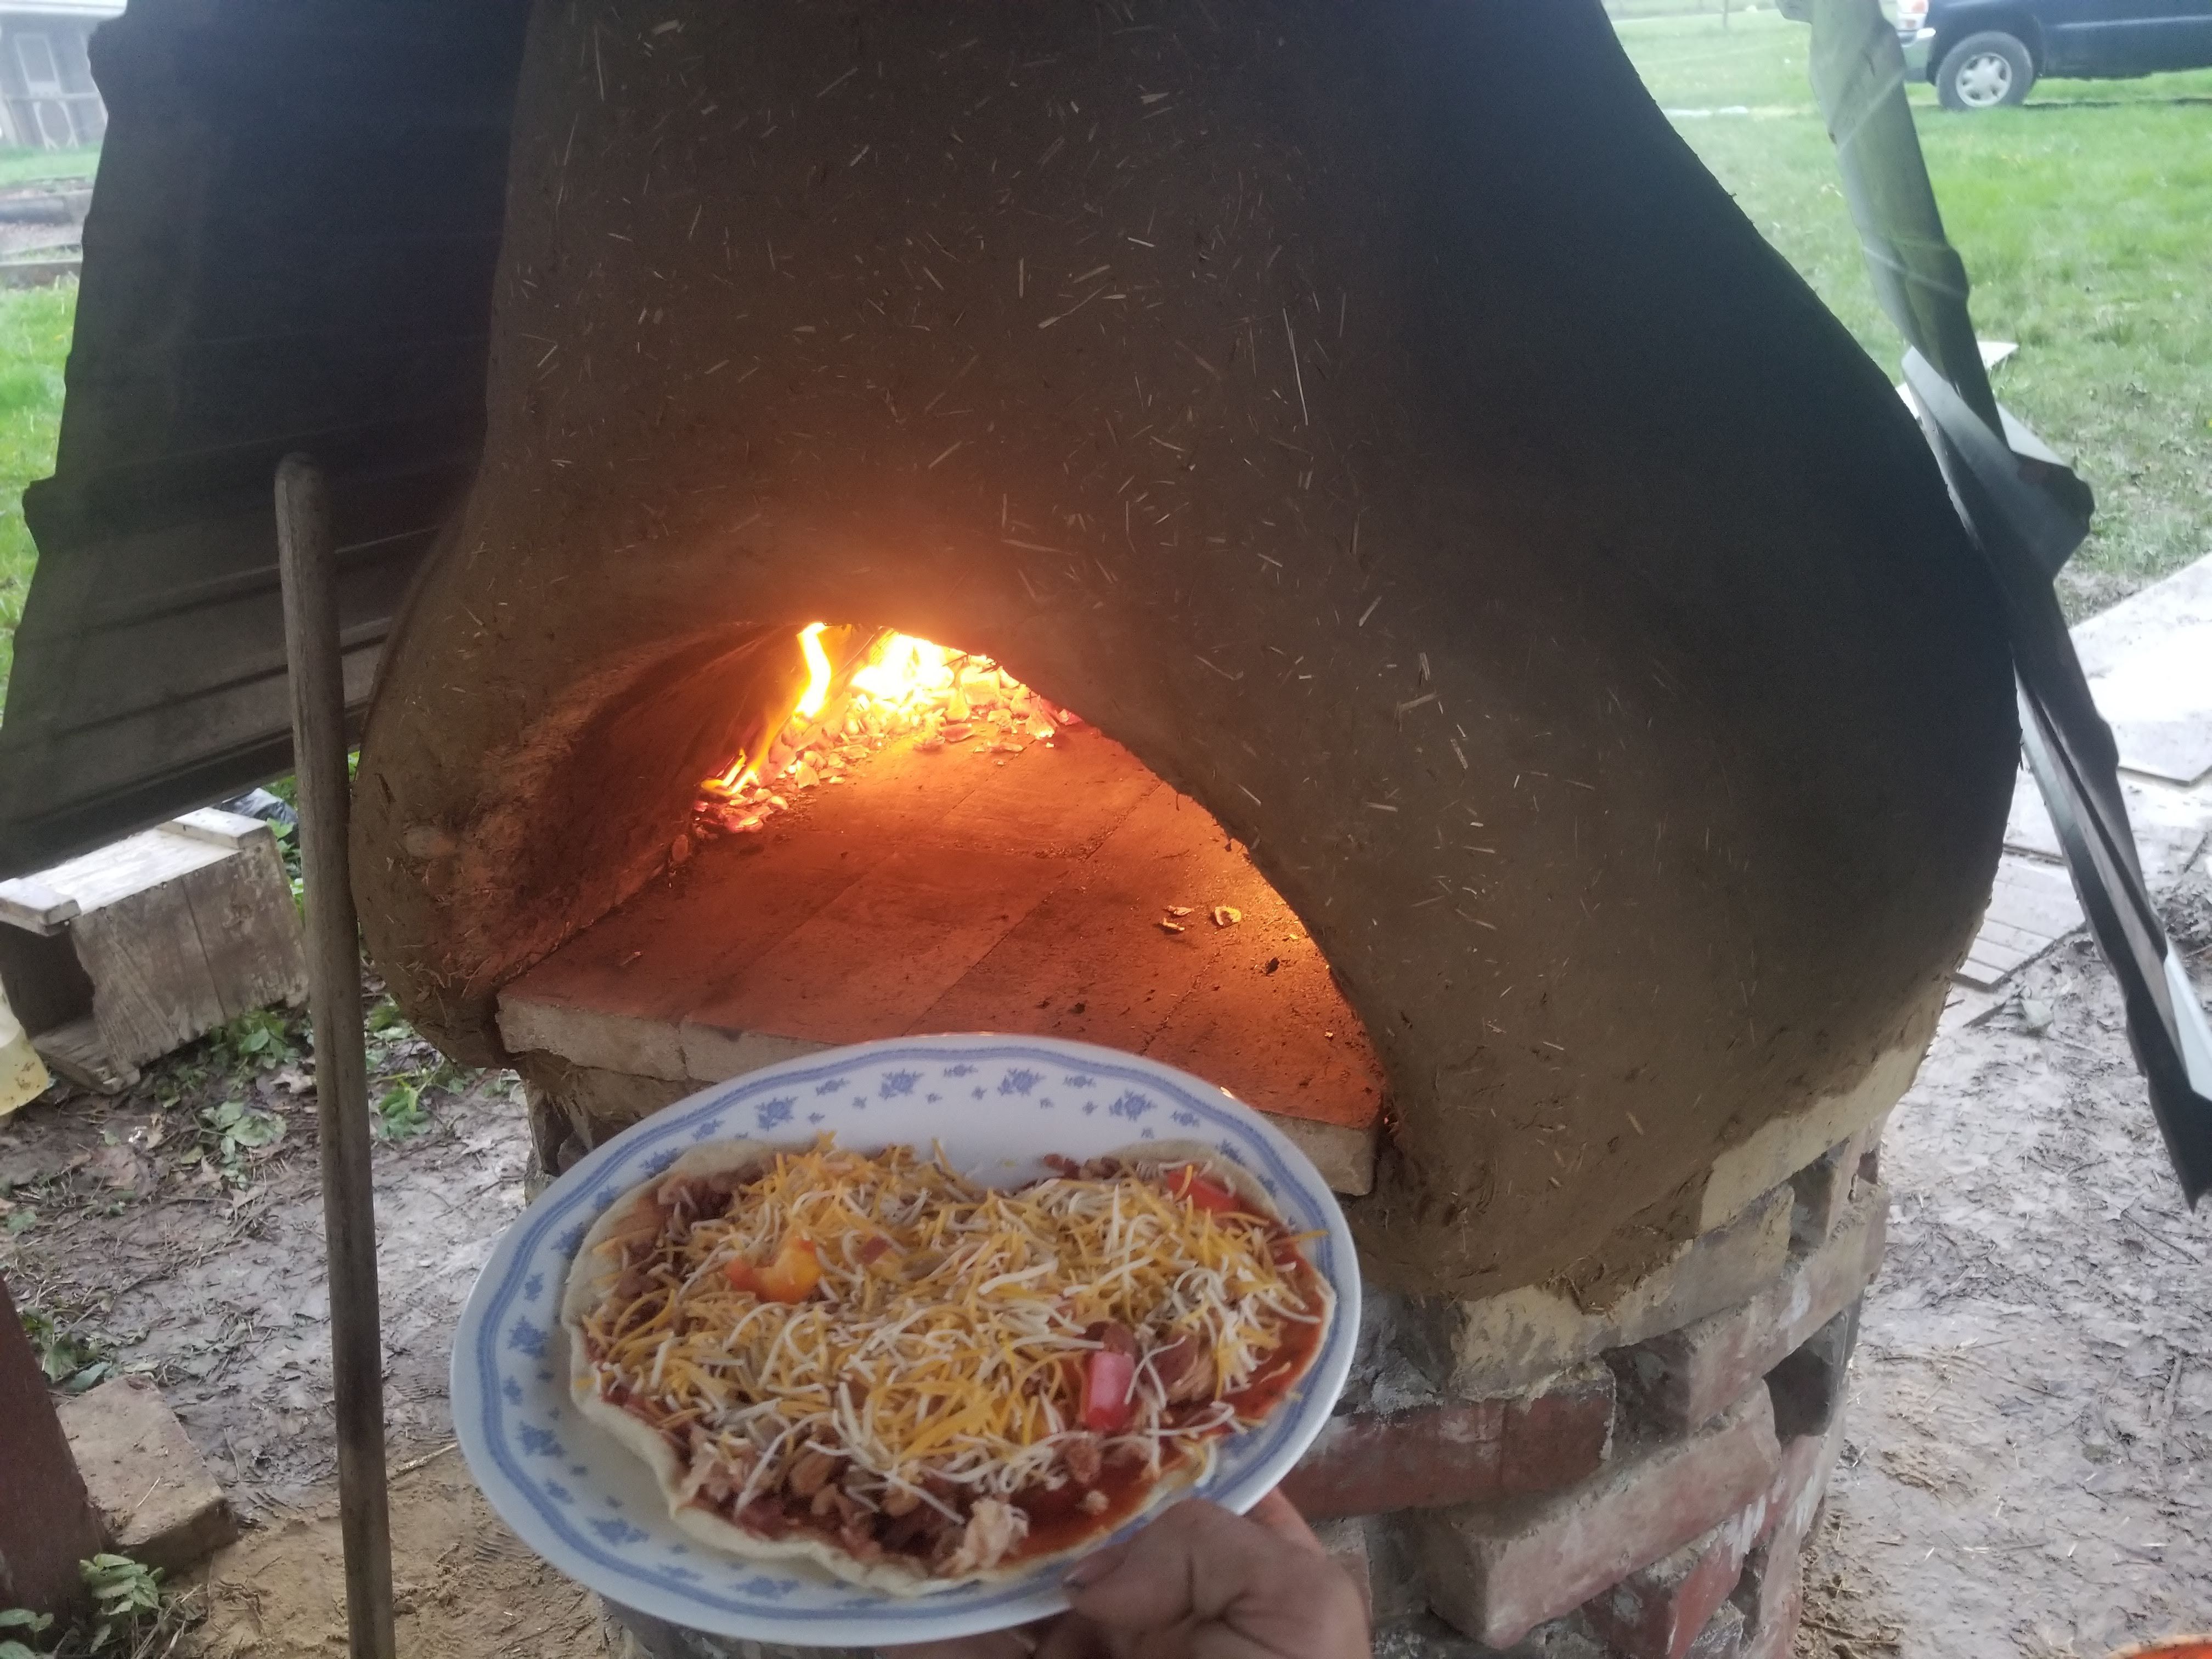 Throwing the pizza into the earthen cob oven